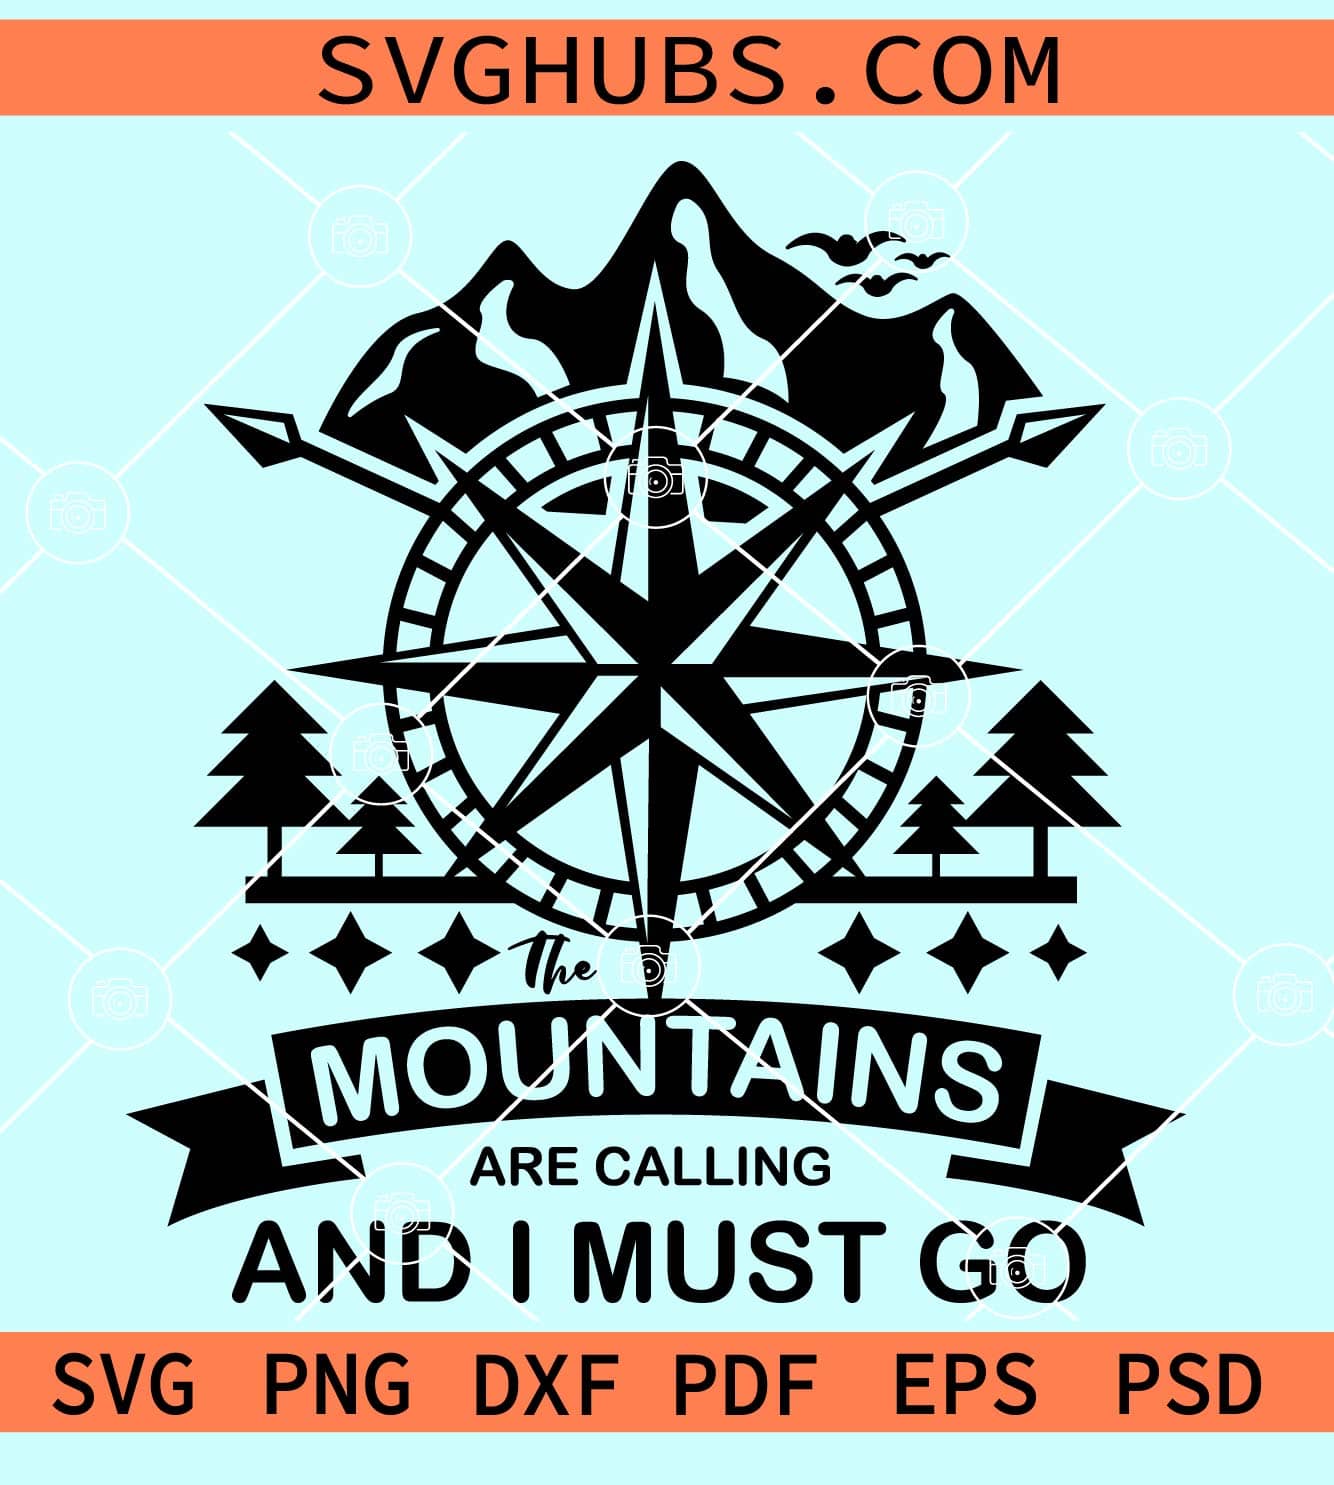 Mountains are calling and I must go svg